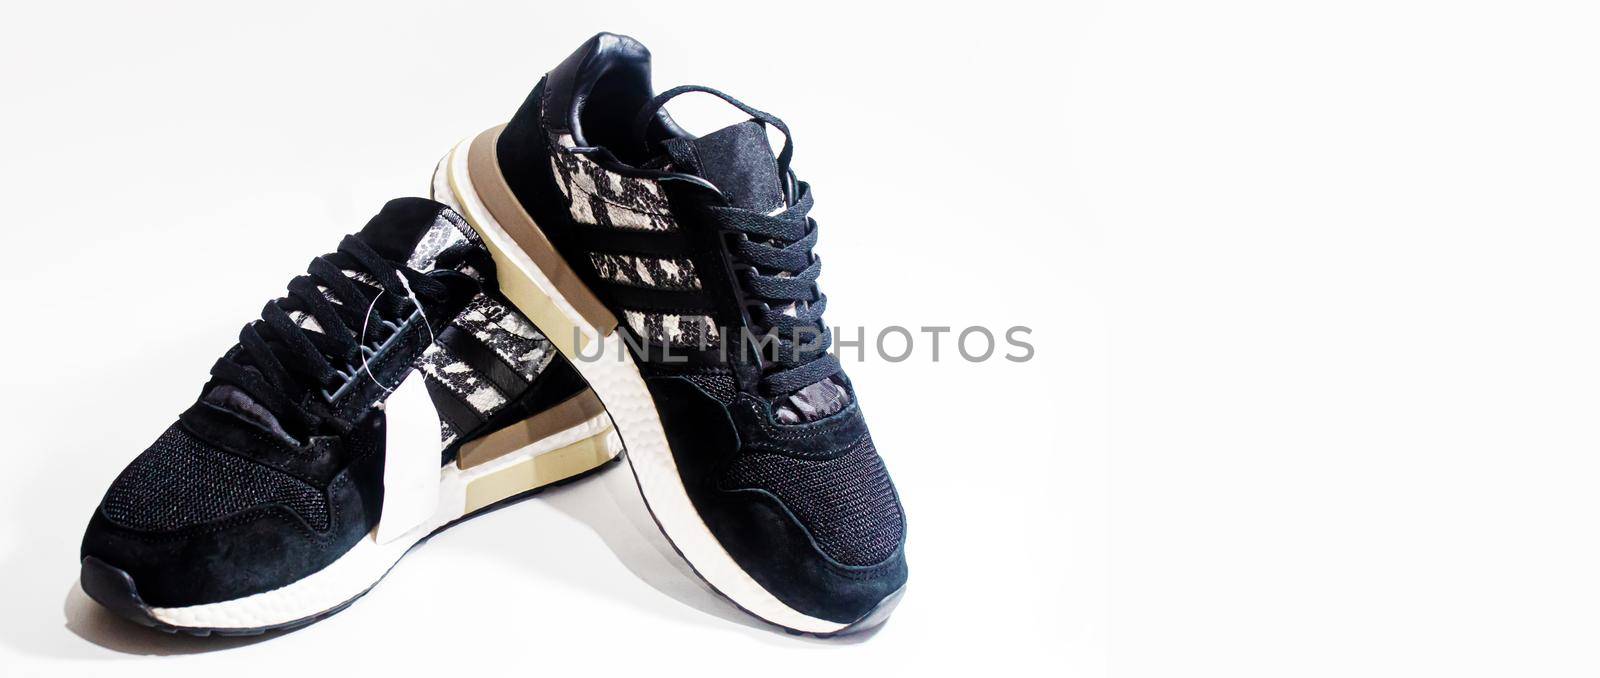 sneakers on white background. selective focus.sports